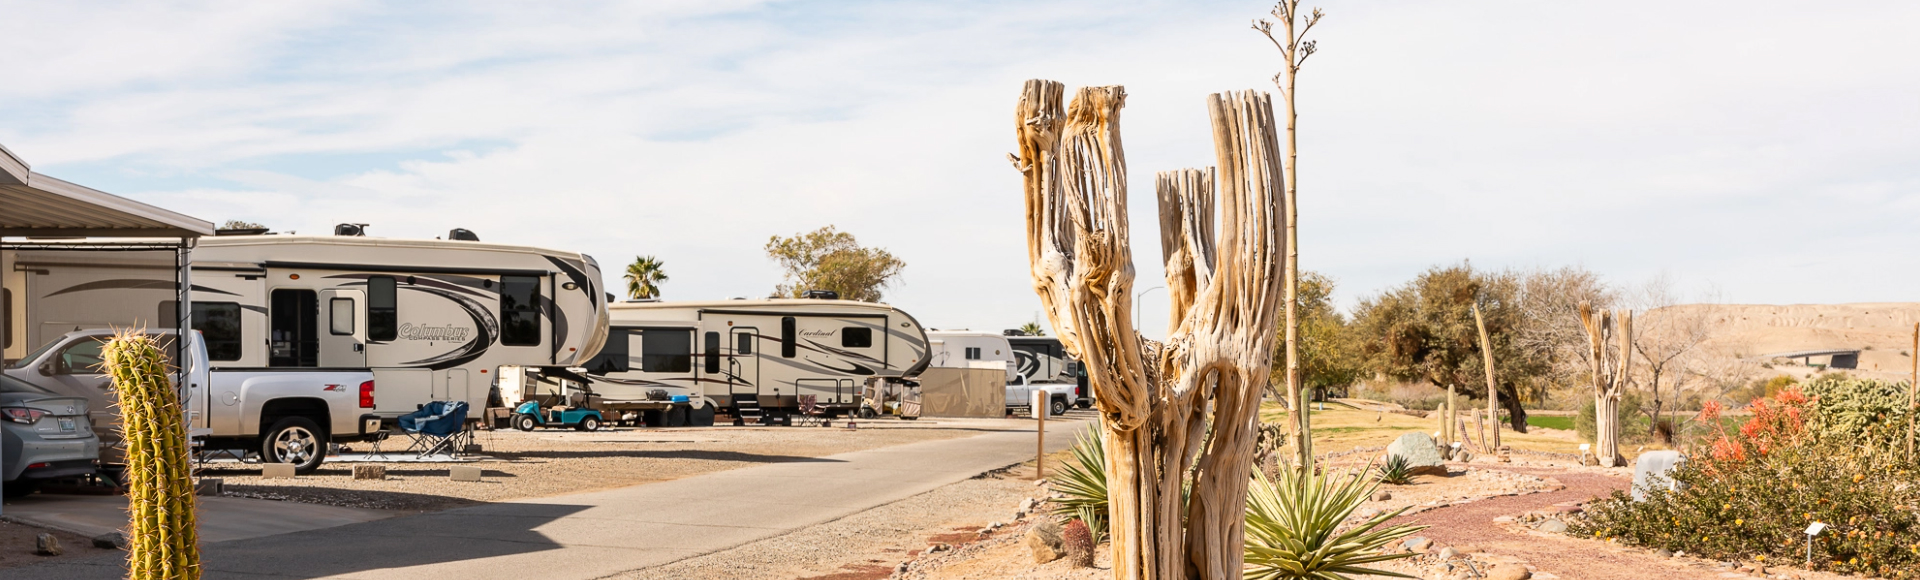 Several RV's nestled in the natural beauty of saguaro cactus skeletons and other desert plants.